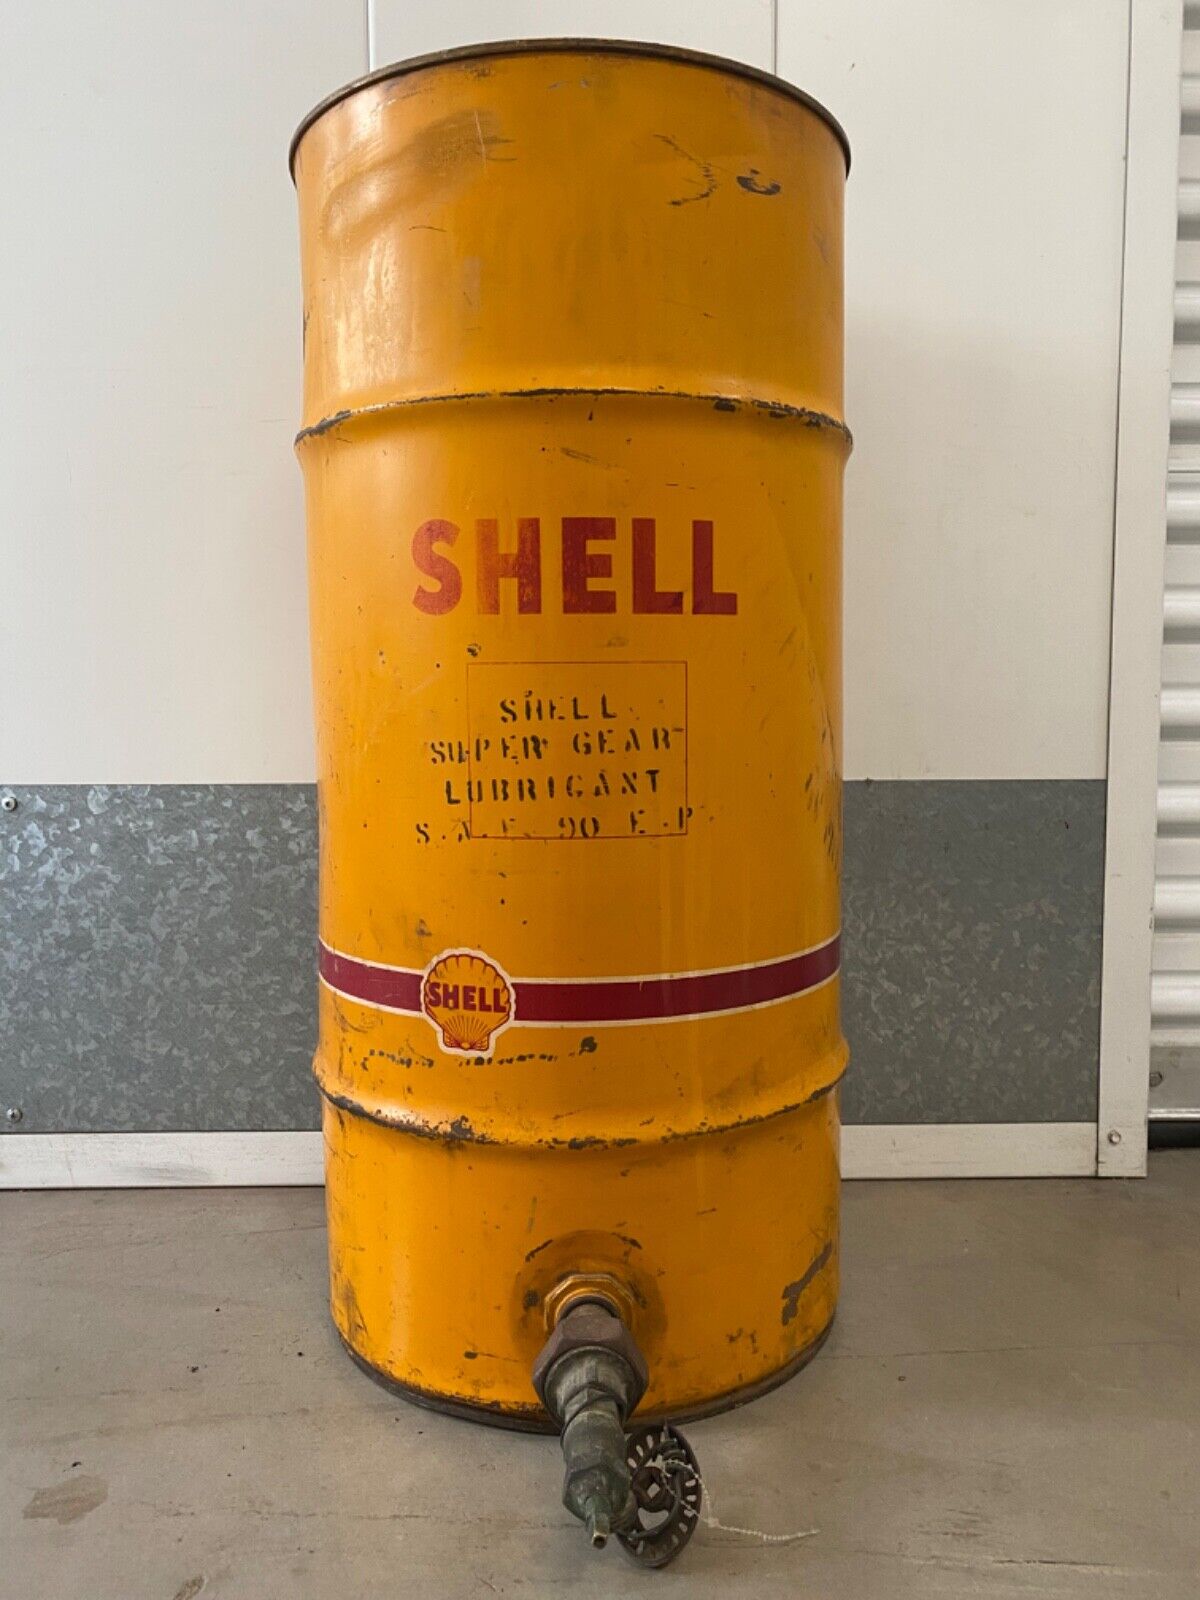 🔥 Very RARE Antique Old SHELL Petroliana Oil Drum - Super Gear Lubricant, 1940s